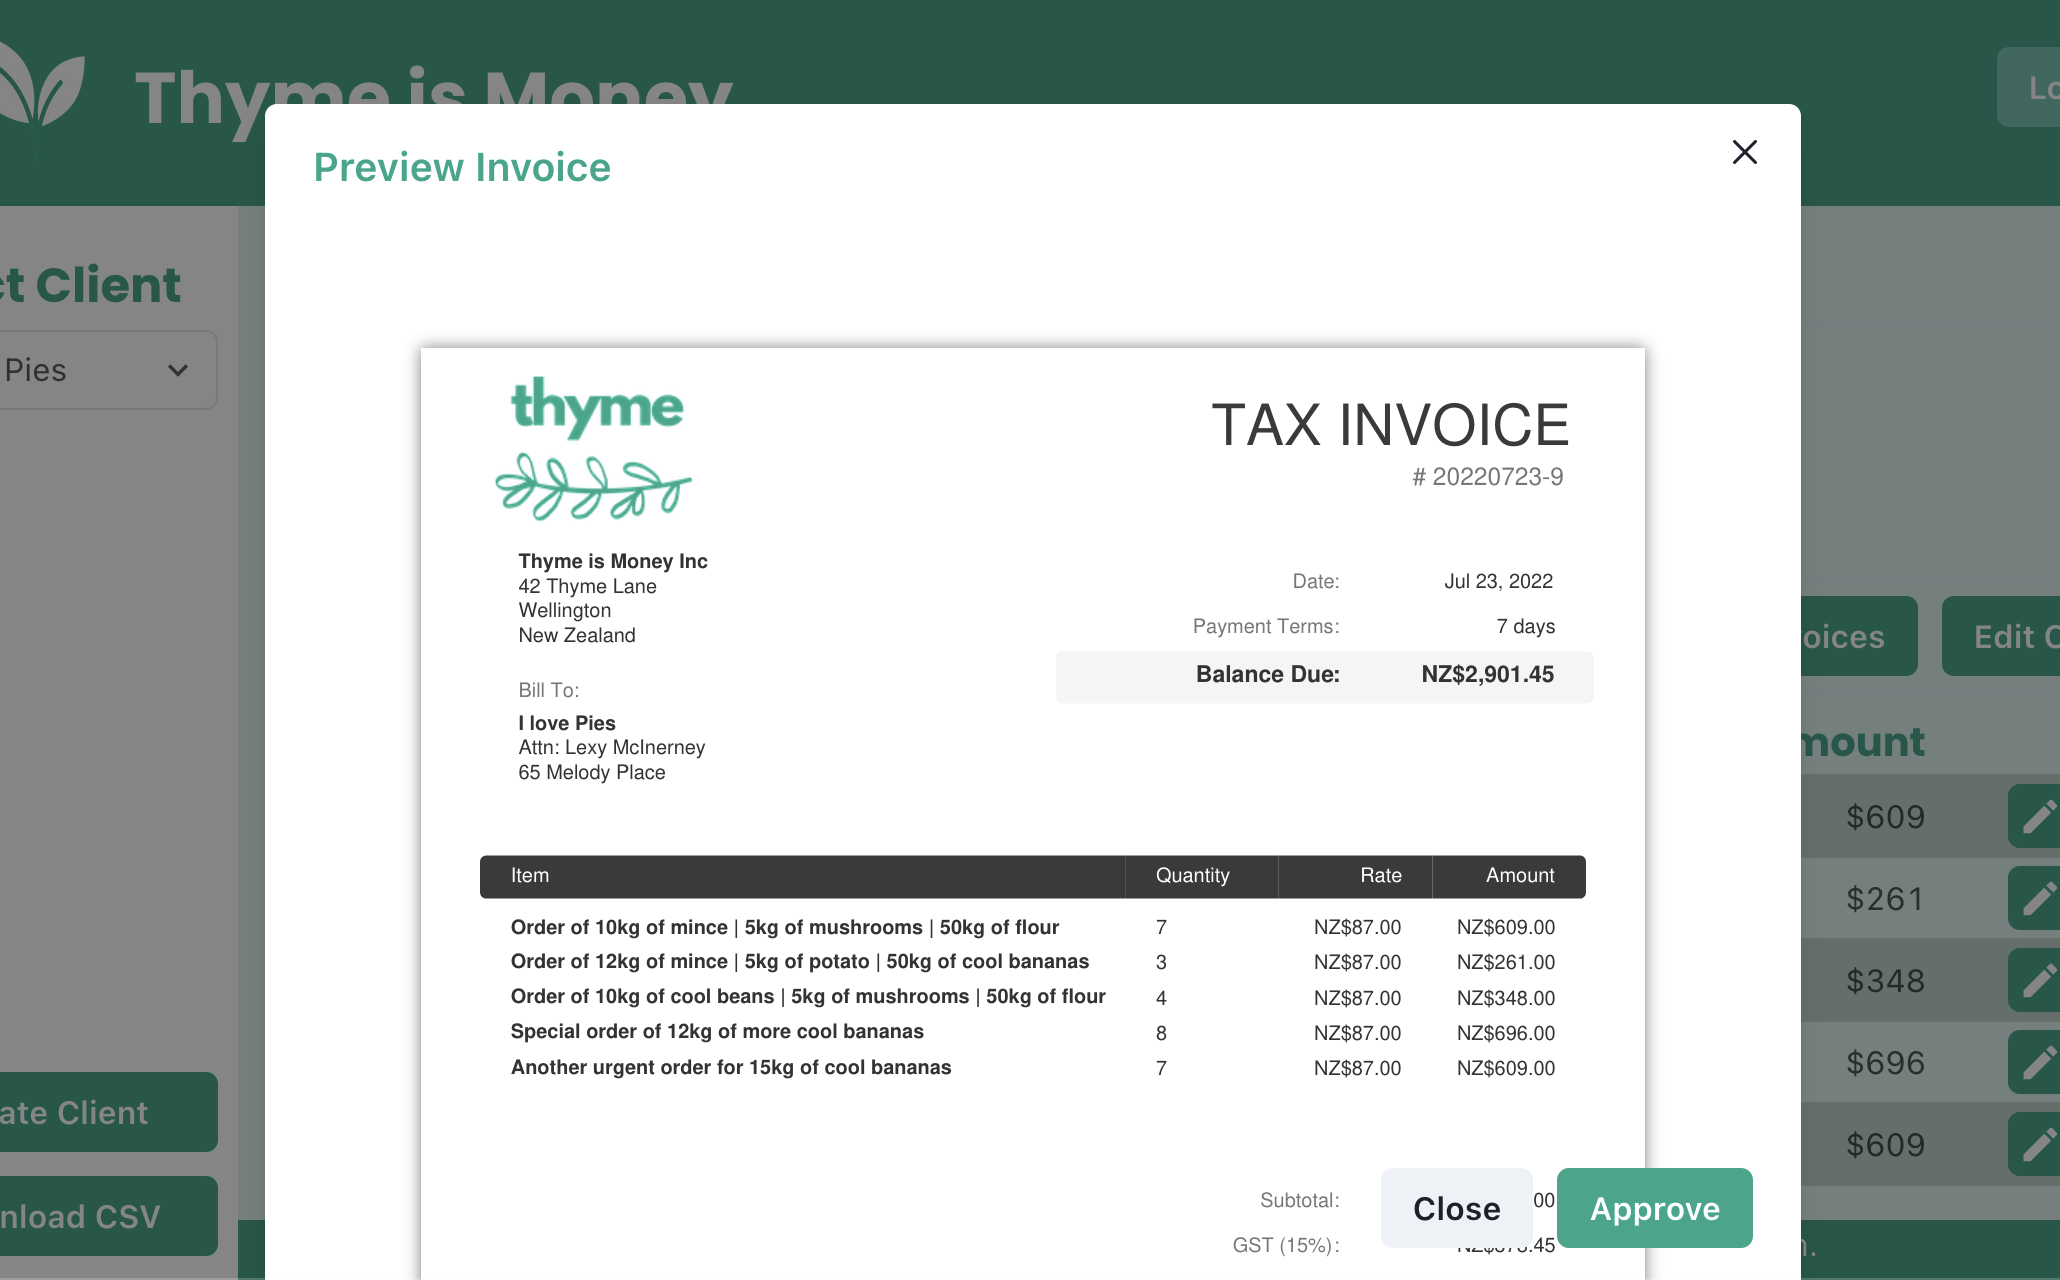 invoice_preview.png